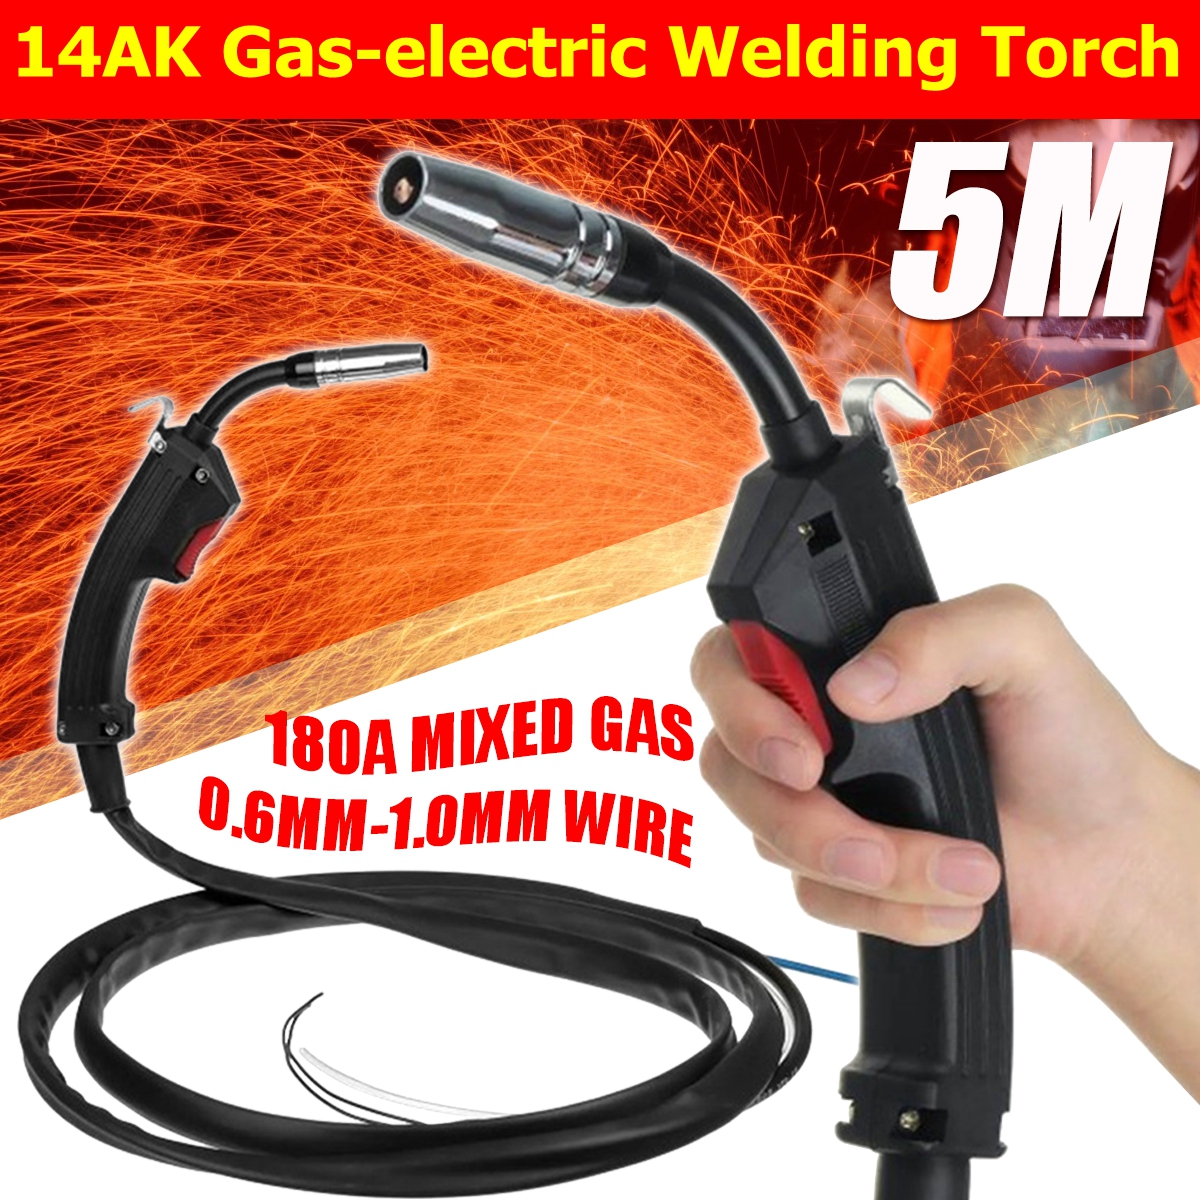 Practical-Gas-Welding-Torch-Air-Cooled-Welding-Torch-Replacement-For-MIG-MAG-Welding-Machine-1762073-1